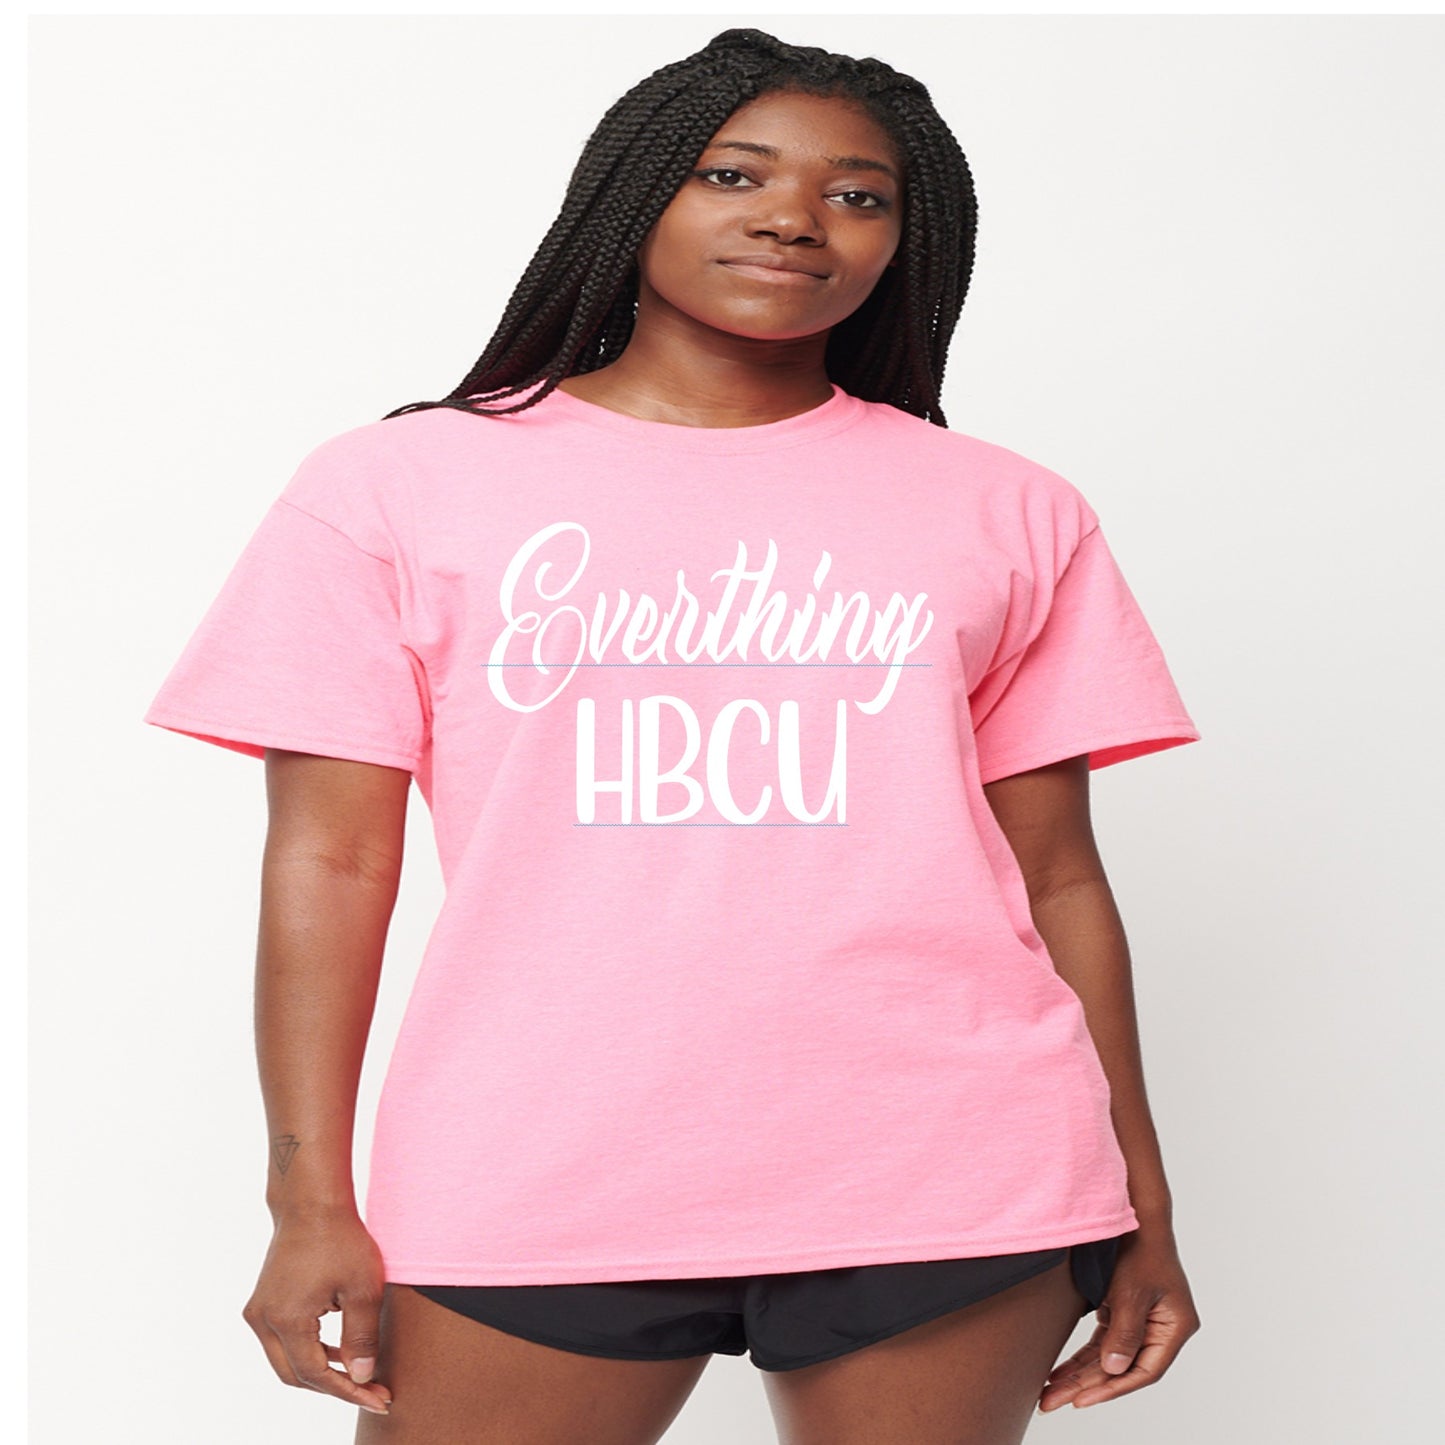 EVERYTHING HBCU TSHIRT. Message us for additional colors or customizations. Contact us form at the bottom of the website